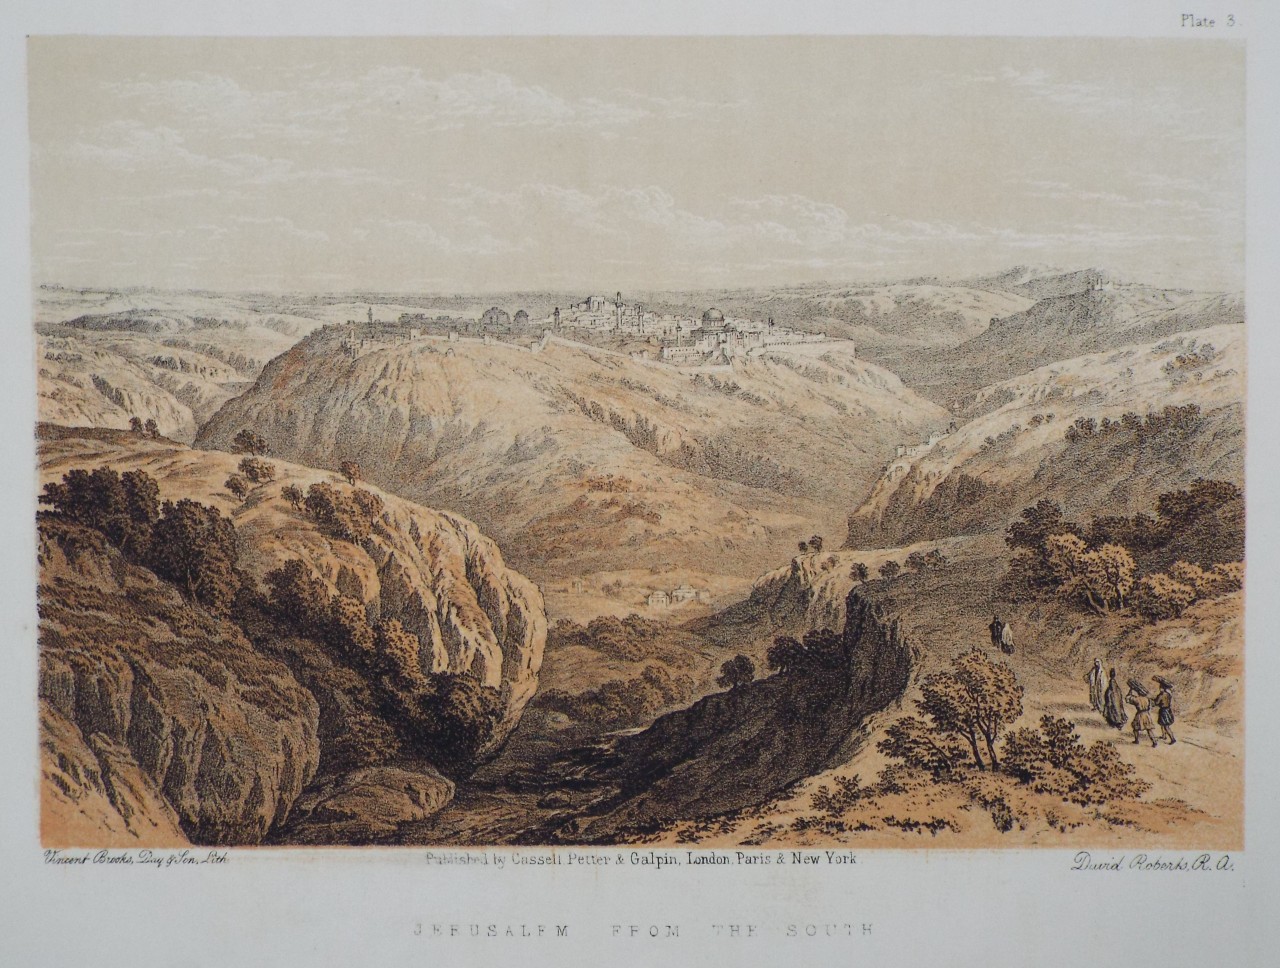 Lithograph - Jerusalem from the South.